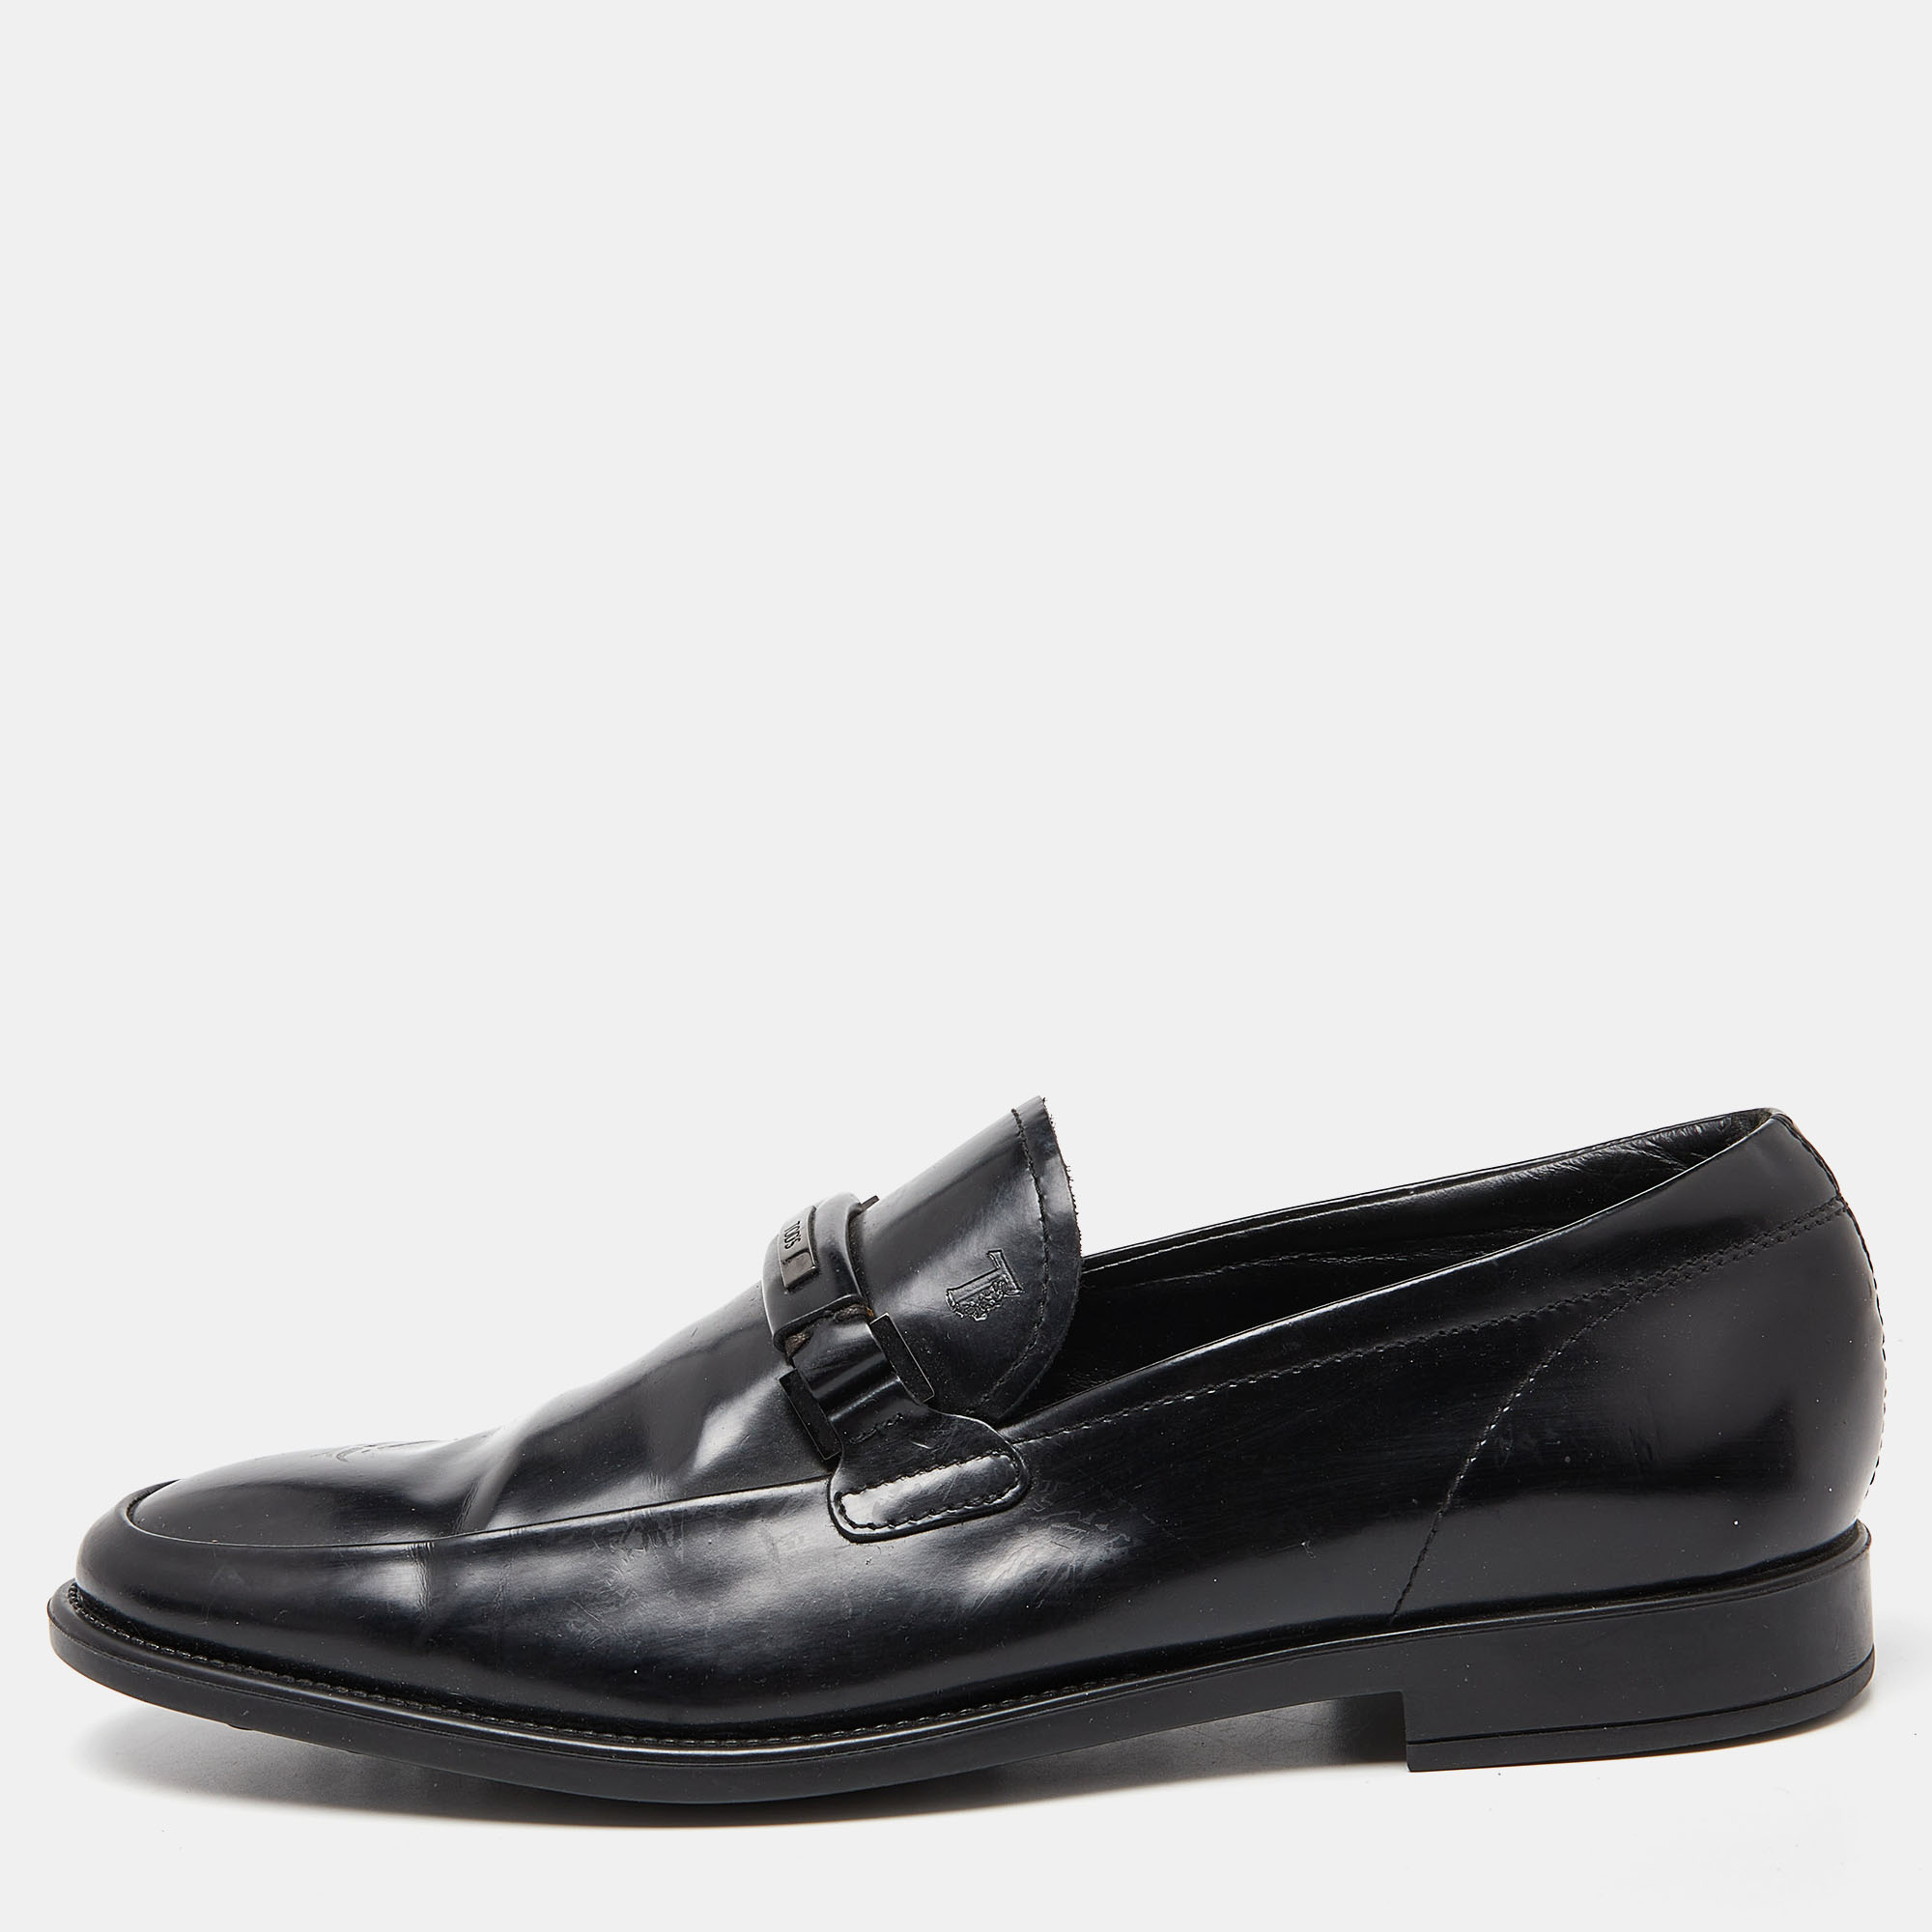 Tod's black patent leather slip on loafers size 39.5